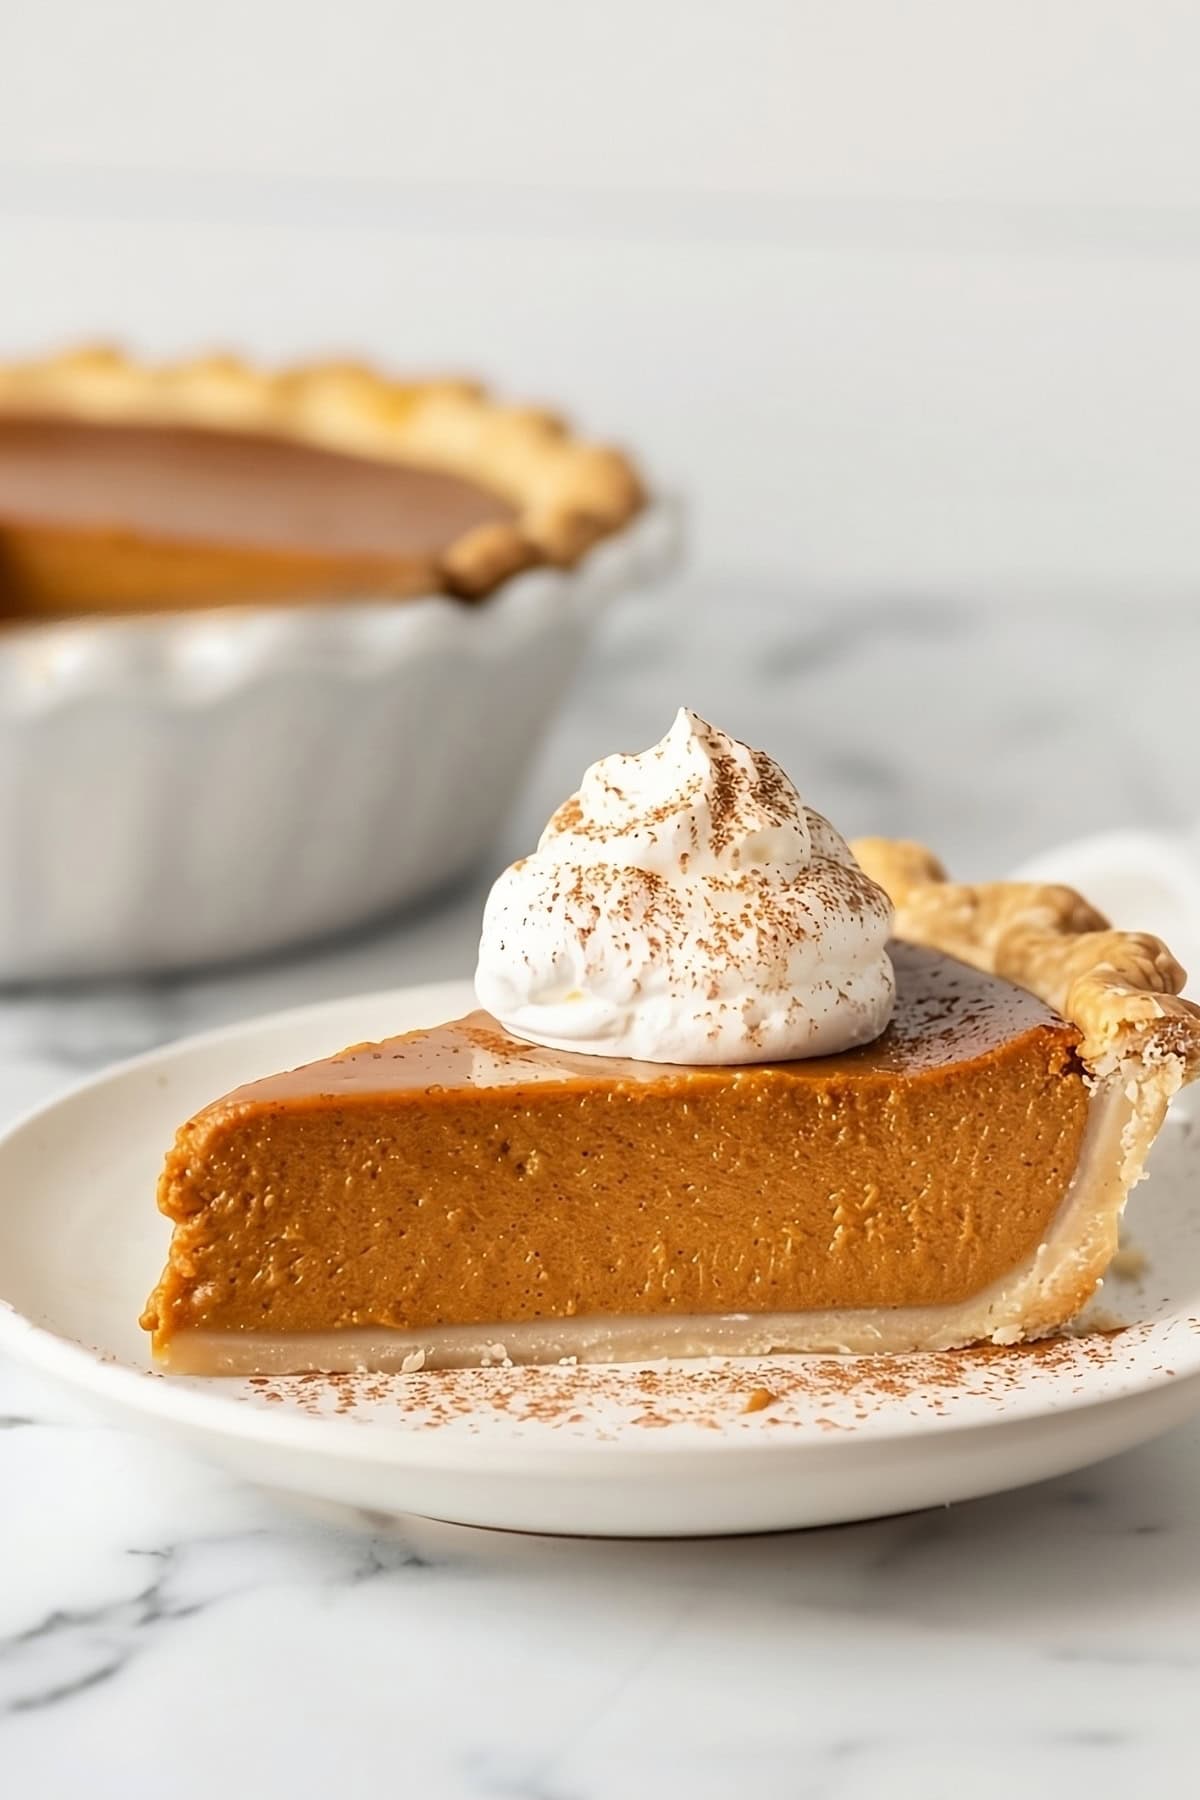 Slice of pumpkin with eggnog whipped cream on top.